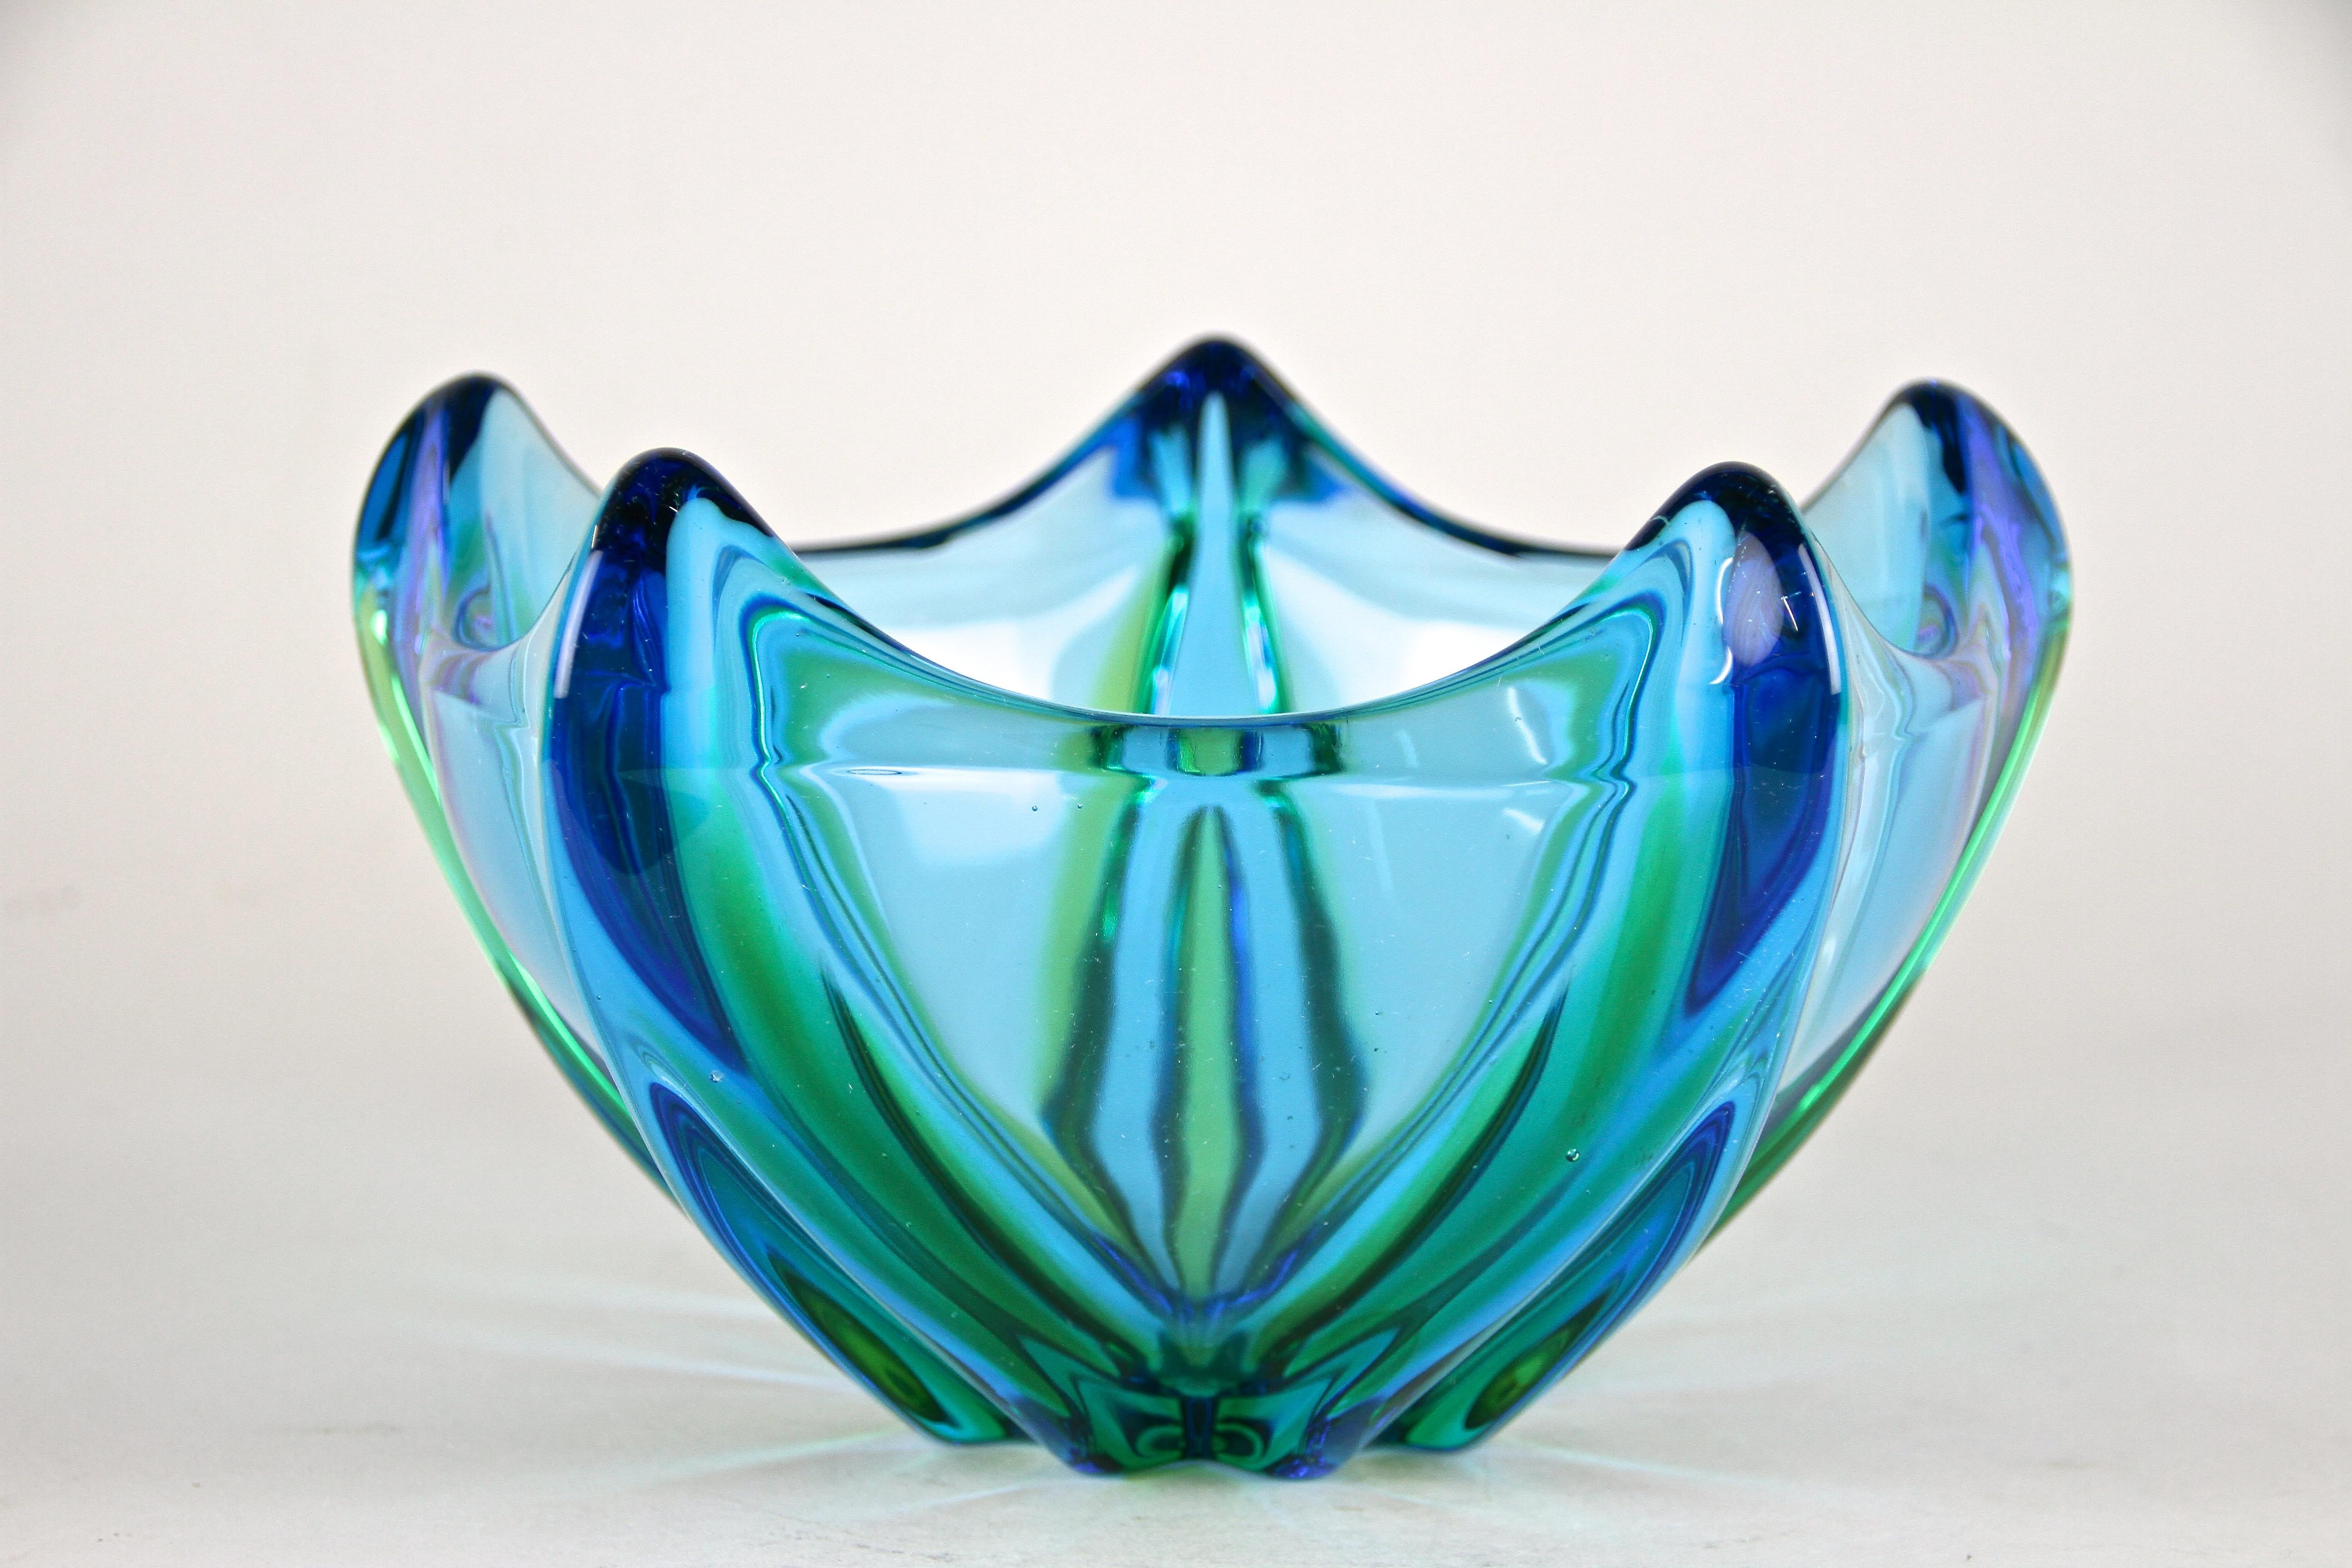 Unique mid century Murano glass bowl out of the world renown workshops in Italy from the period around 1960/70. This very modern looking pentagonal glass bowl reminds of a star or starfish when you look from above. Wonderful details like the